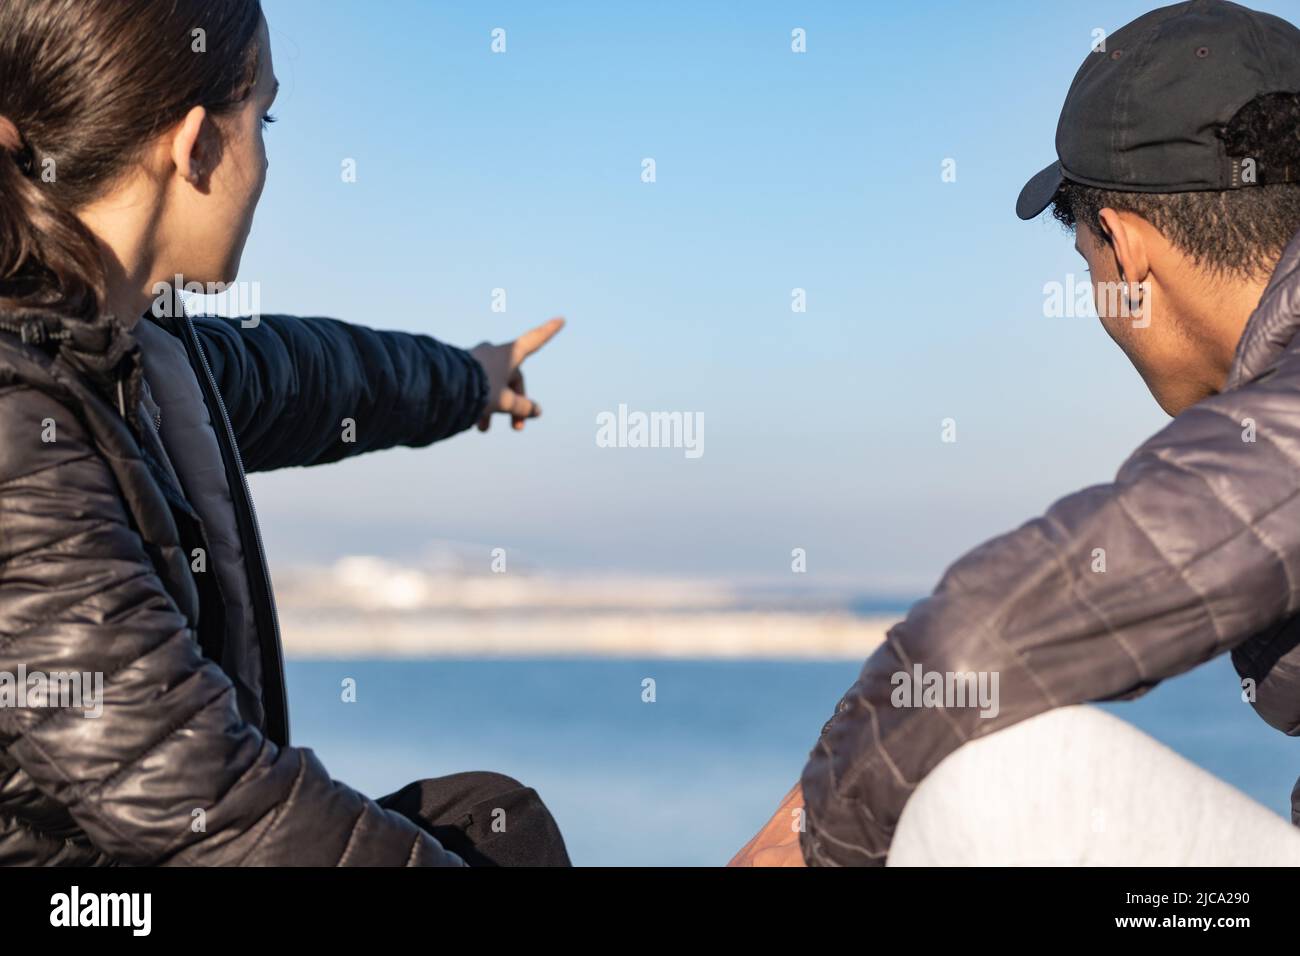 A couple enjoys and looks at the sea. Rear view. Focus on foreground. Stock Photo